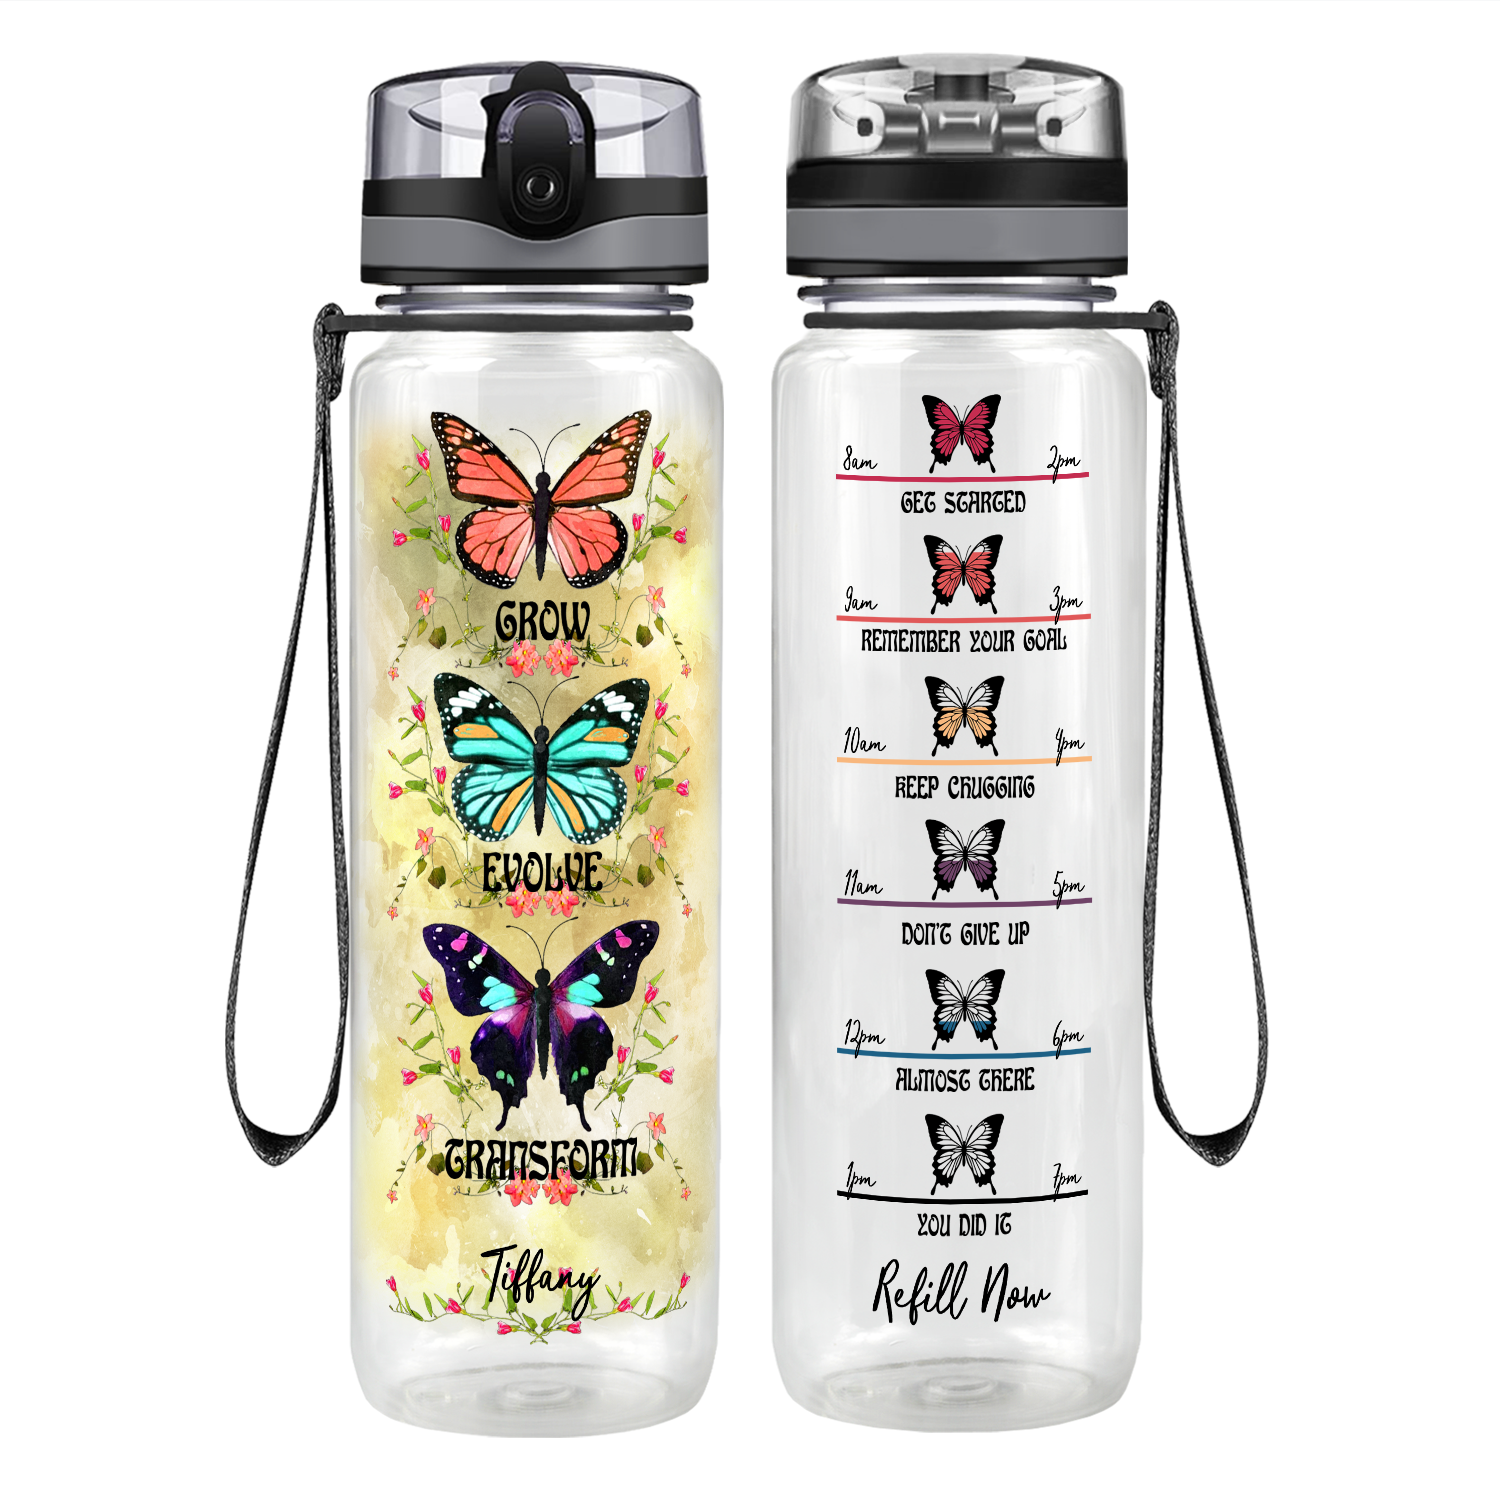 Personalized Grow Evolve Transform Motivational Tracking Water Bottle